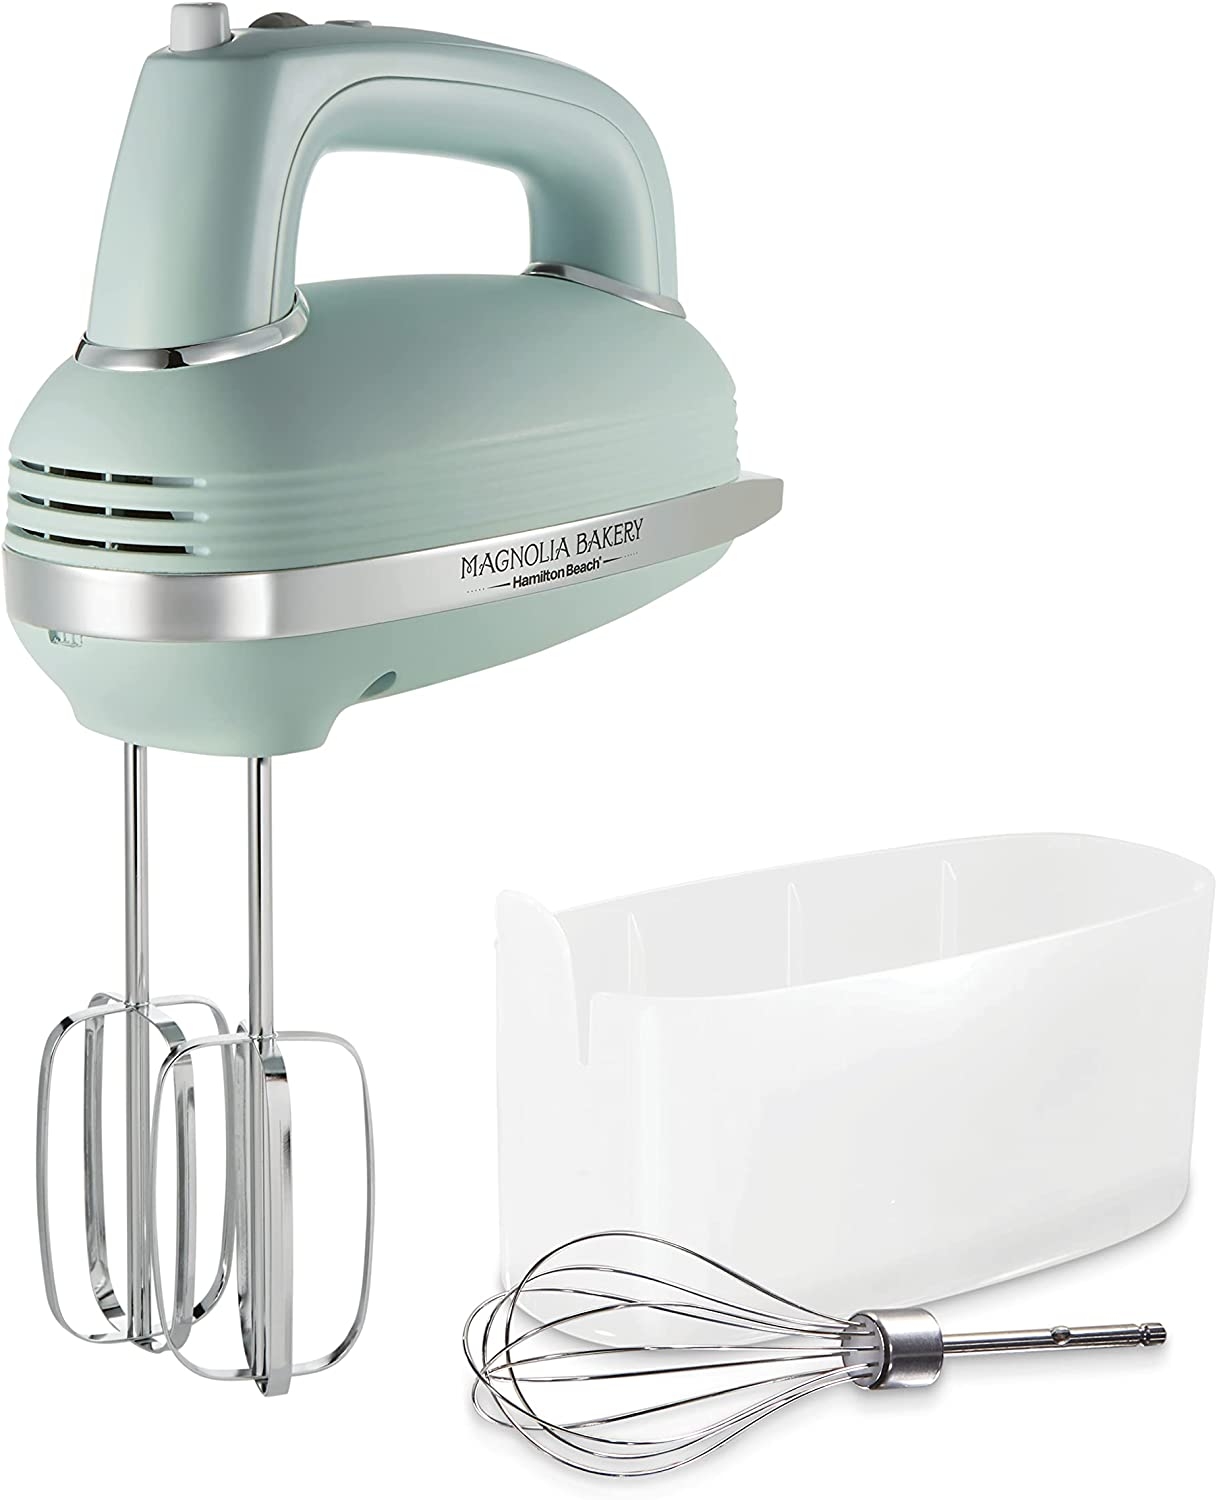 Magnolia Bakery 5-Speed Electric Hand Mixer by Hamilton Beach, Powerful 1.3 Amp DC Motor for Effortless Mixing & Consistent